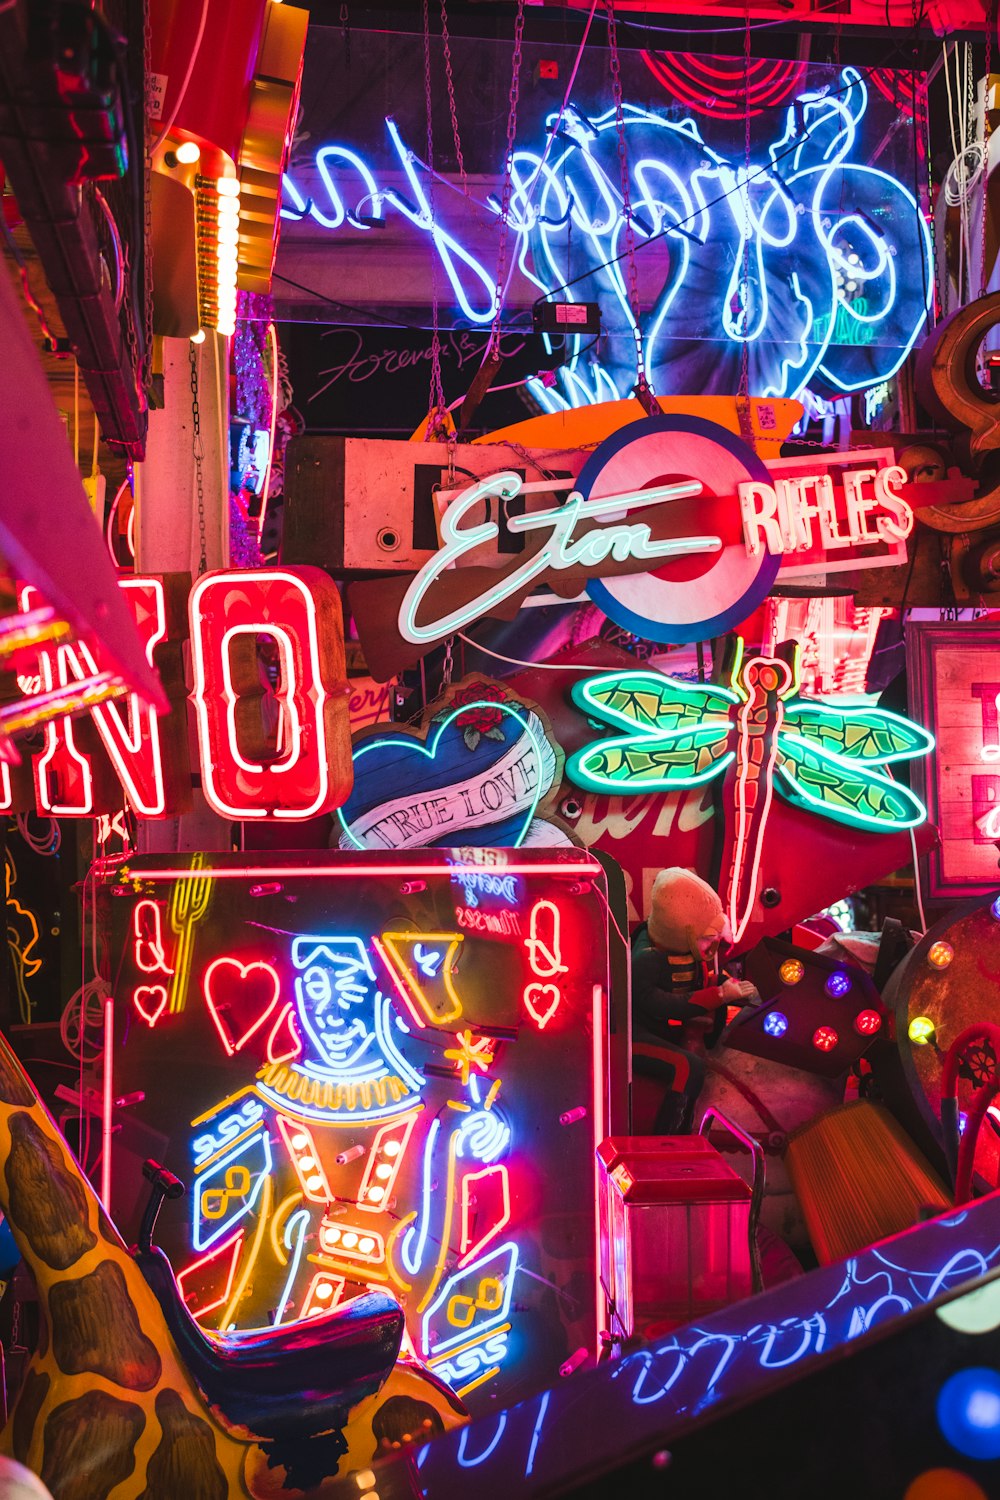 many neon signs are hanging from the ceiling